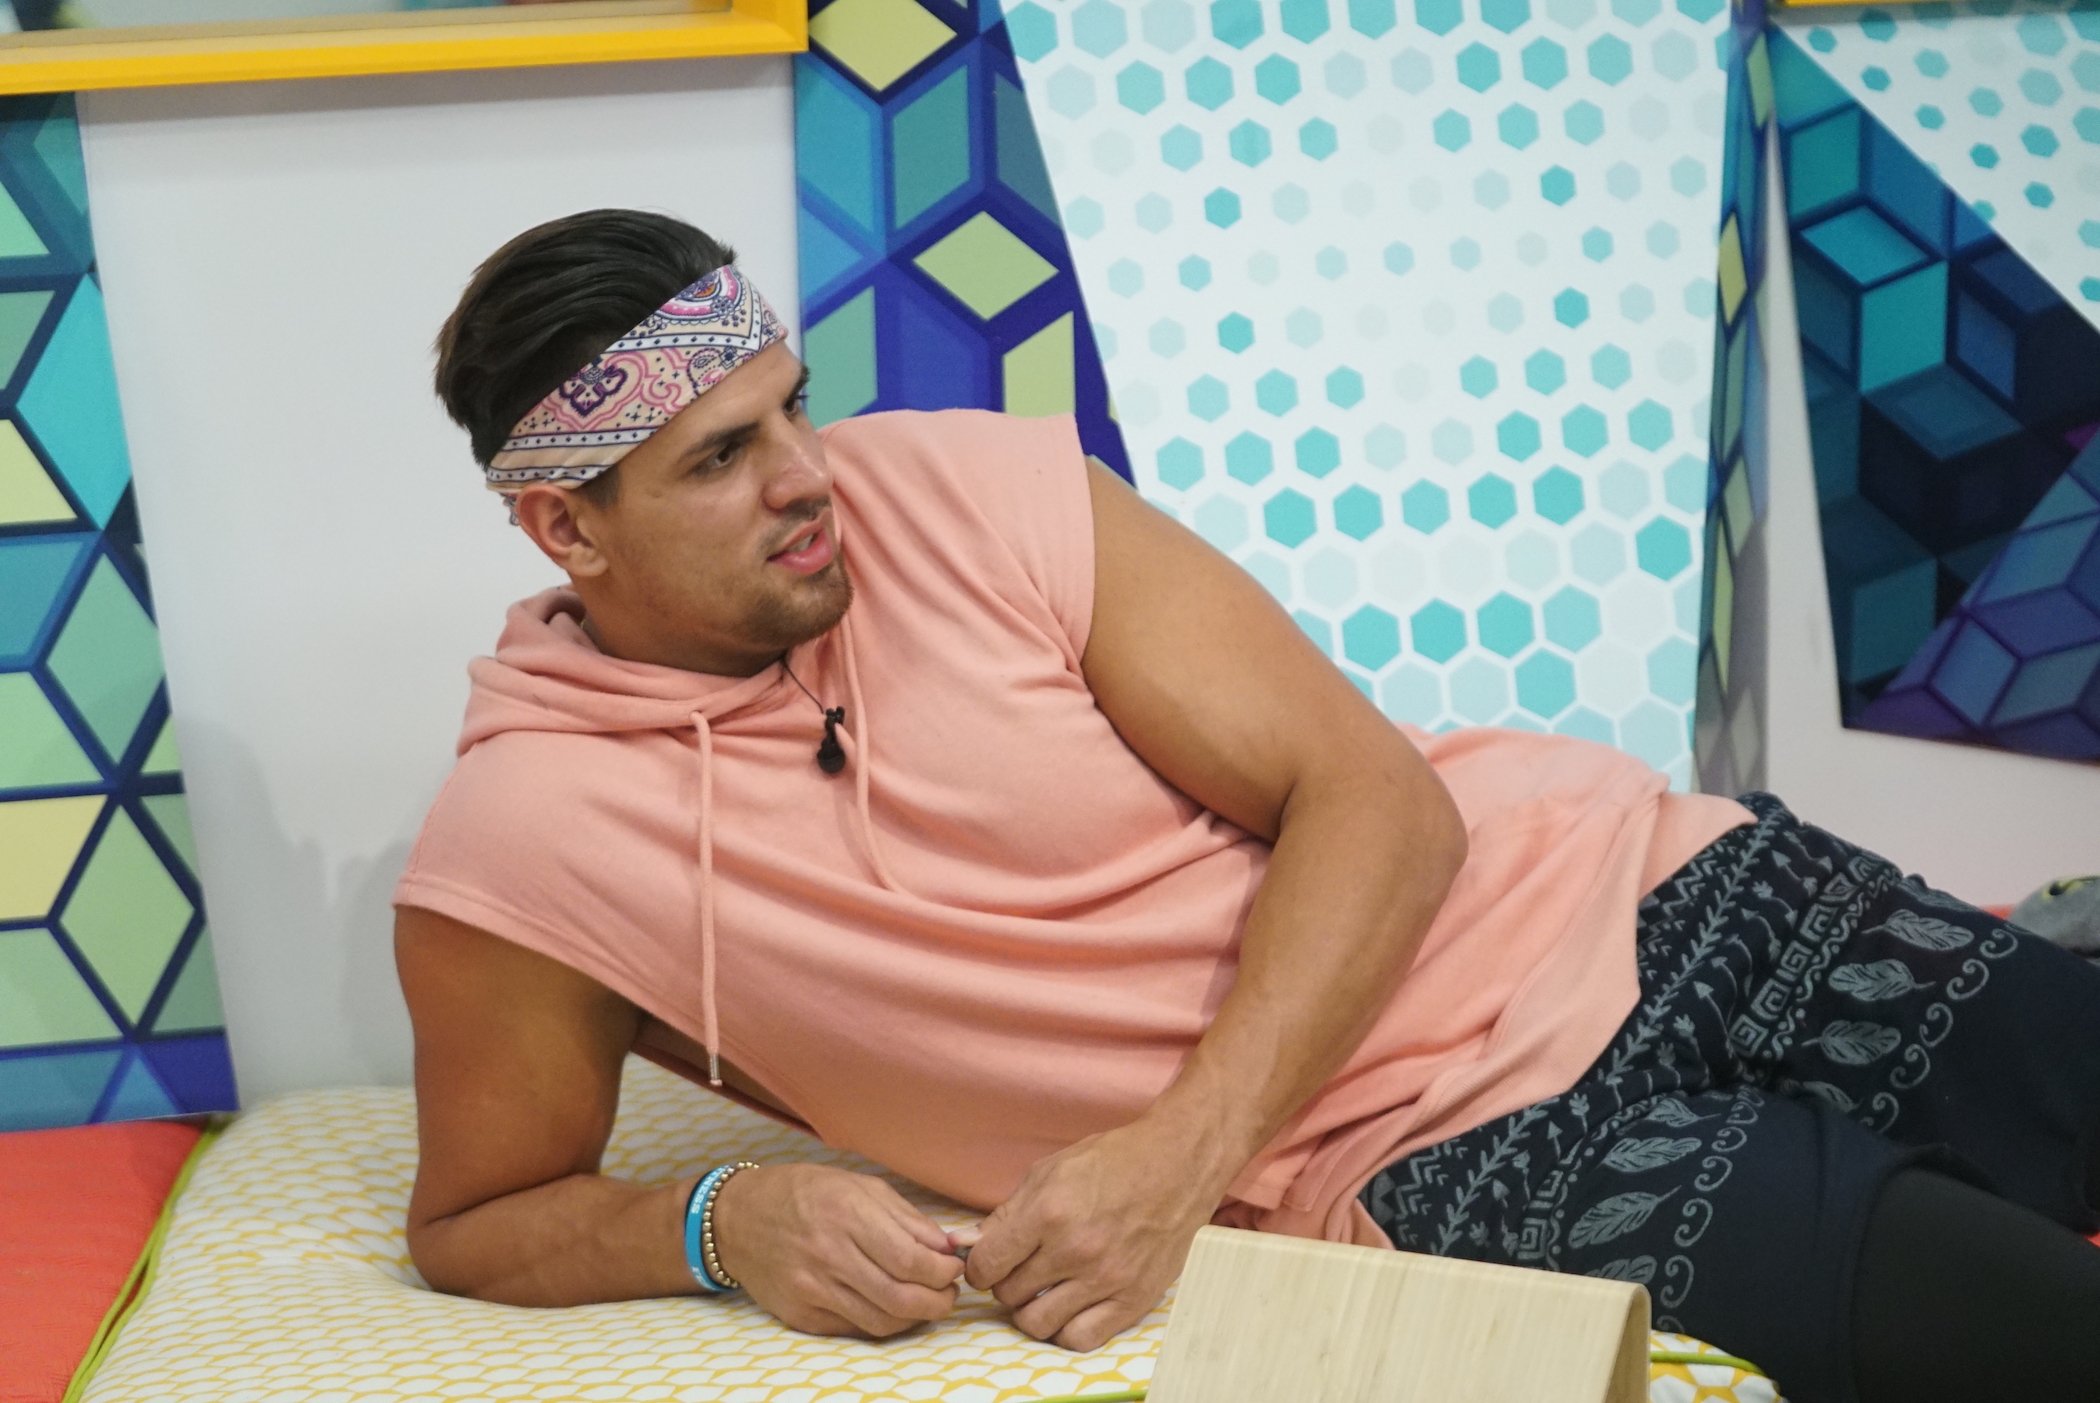 Fessy Shafaat from MTV's 'The Challenge' Season 37 lying on a bed on 'Big Brother'